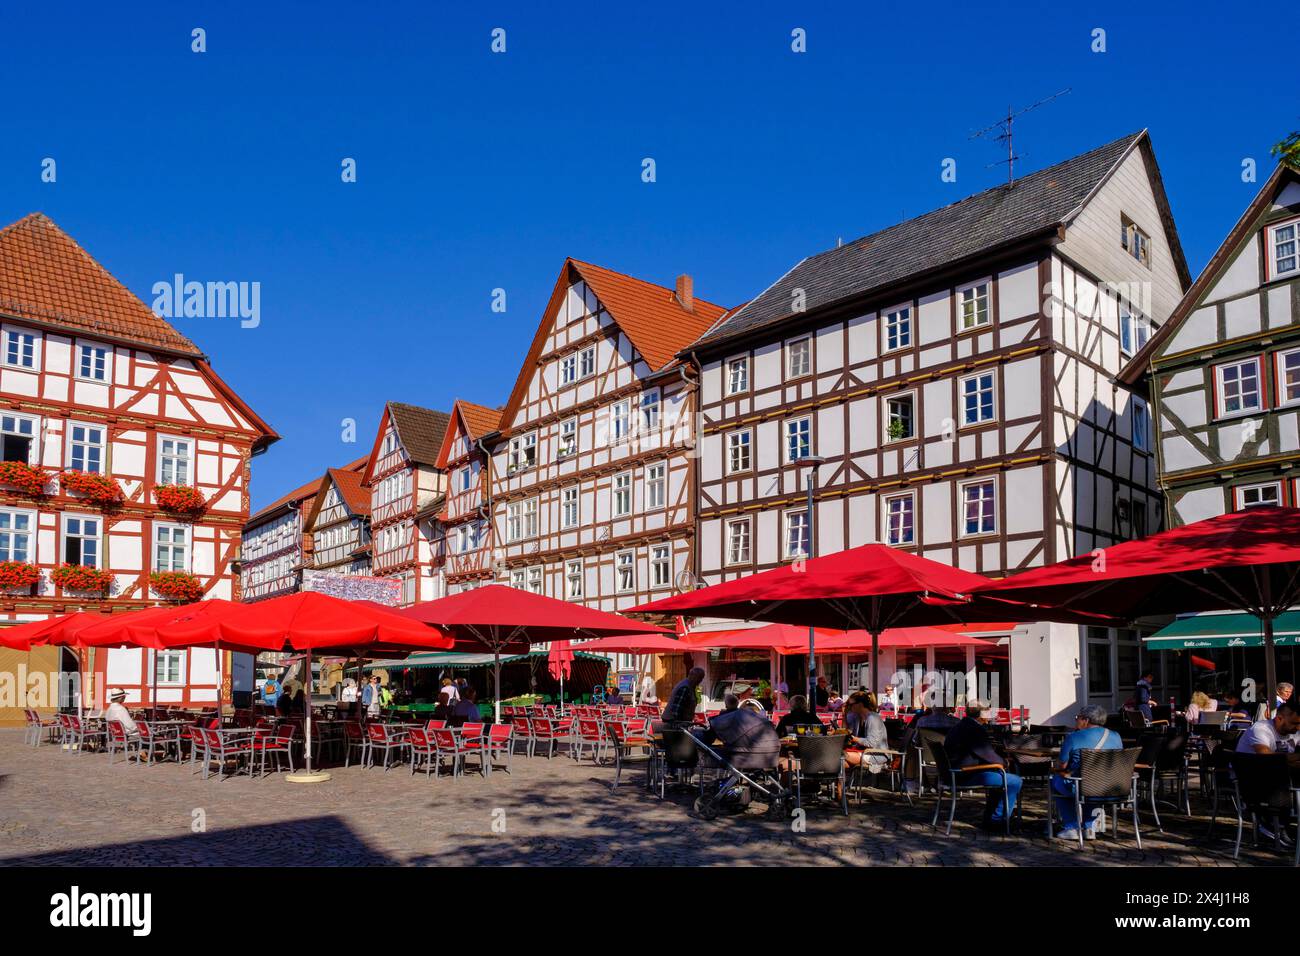 Old town hall, half-timbered houses, market square, Eschwege, Werratal, Werra-Meissner district, Hesse, Germany Stock Photo